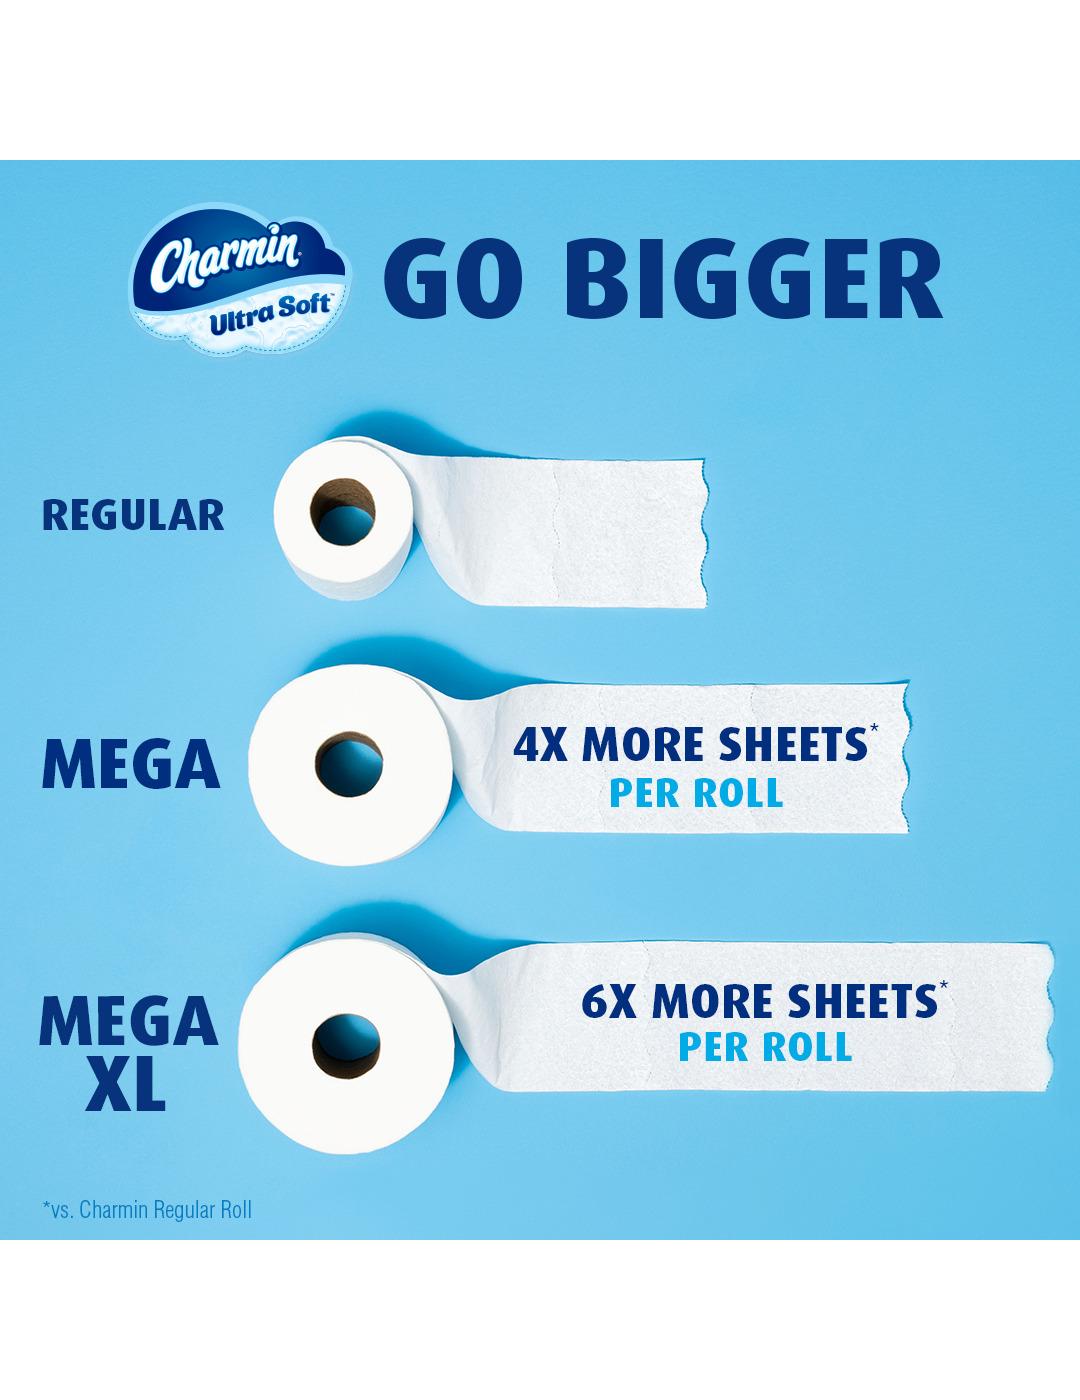 Charmin Ultra Soft Toilet Paper; image 11 of 20